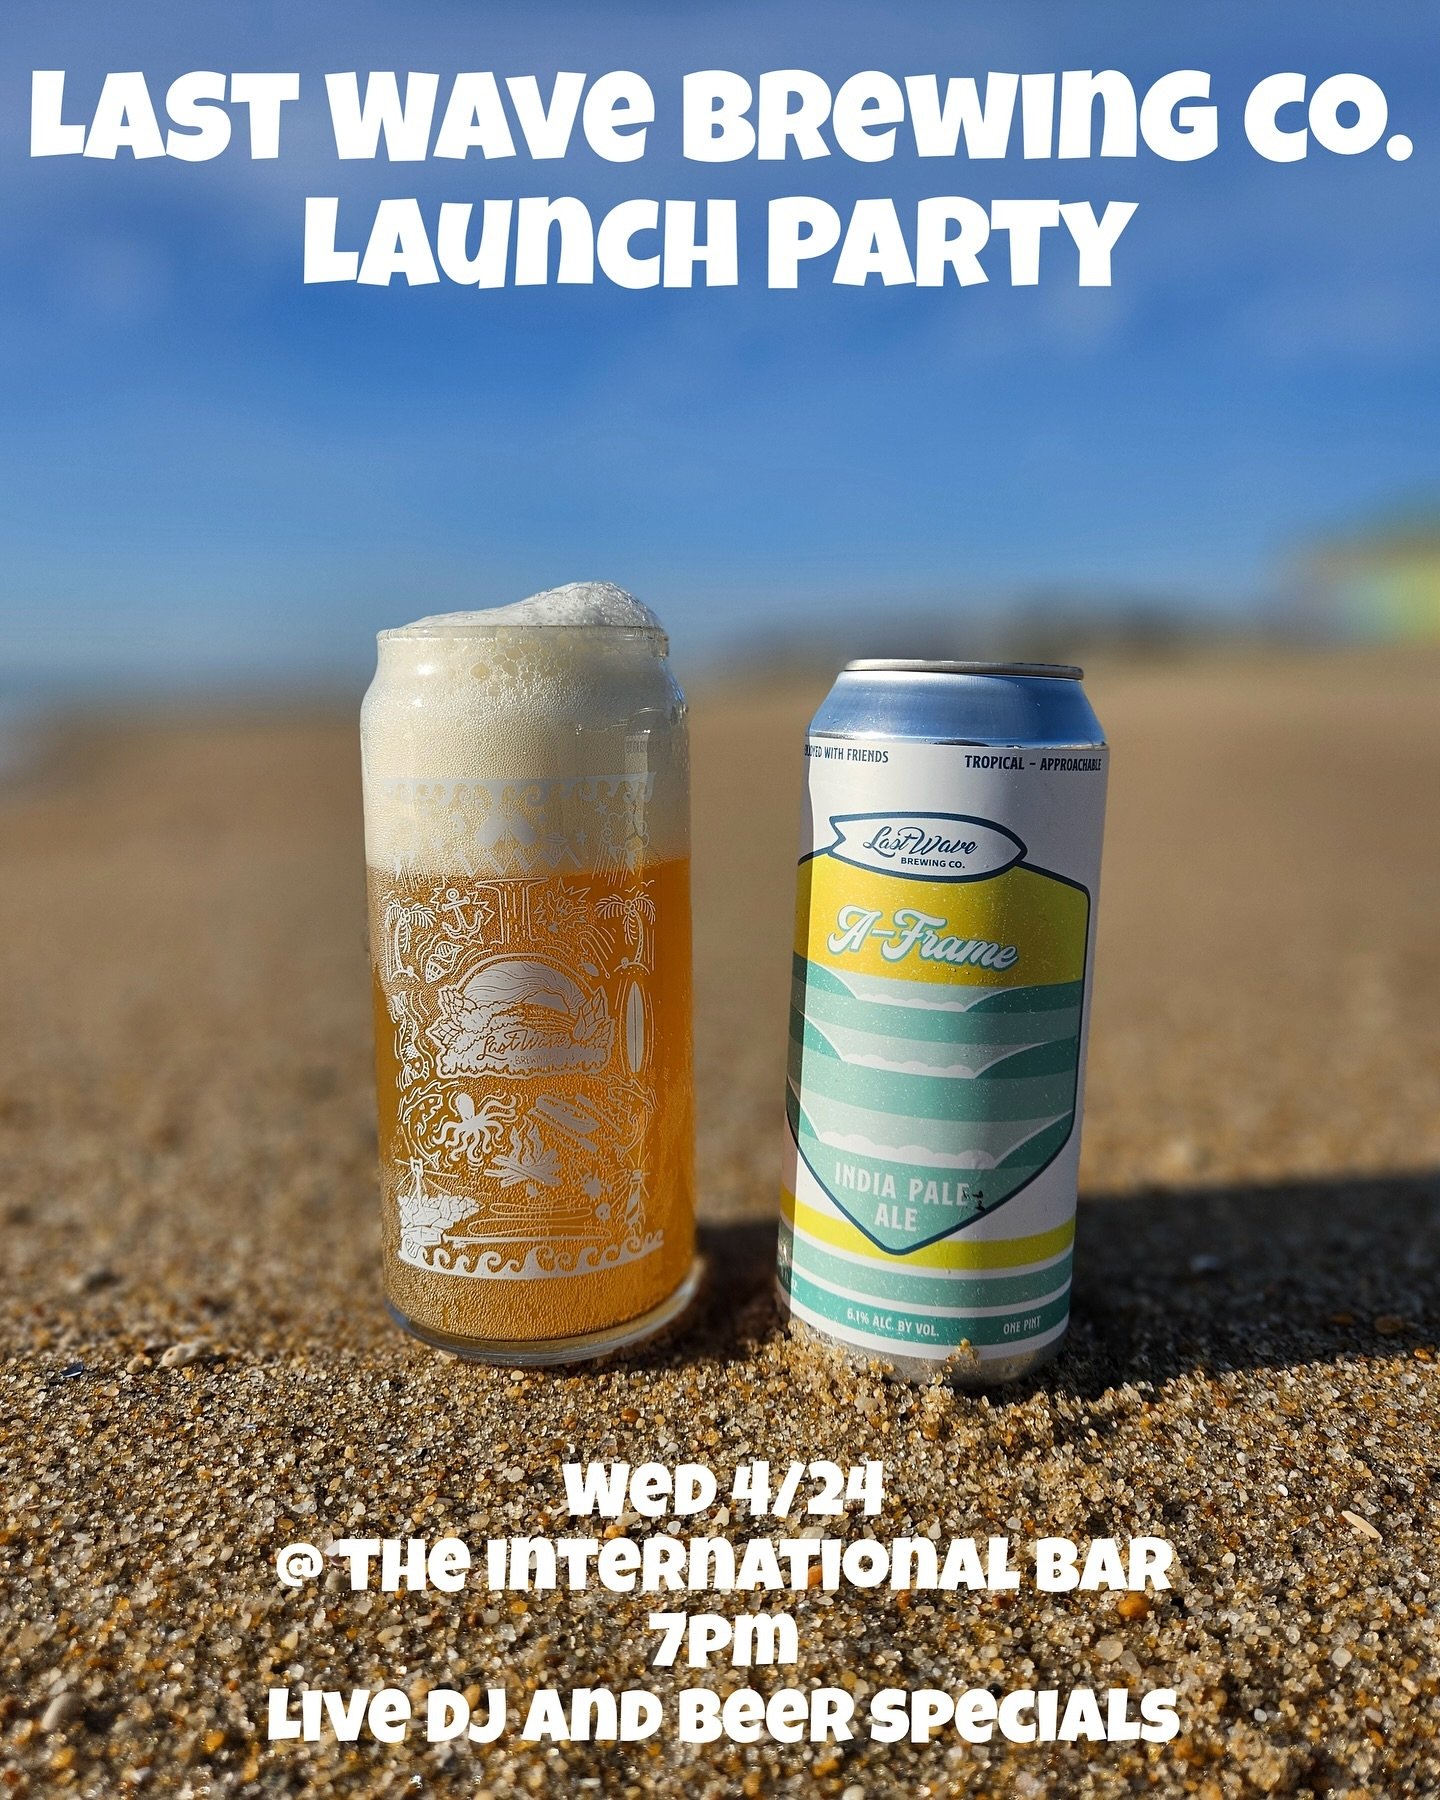 *NEW DATE* (same banger) @theintlbar /// @lastwavebrewing launch party Wed 4/24/24 #palindrome